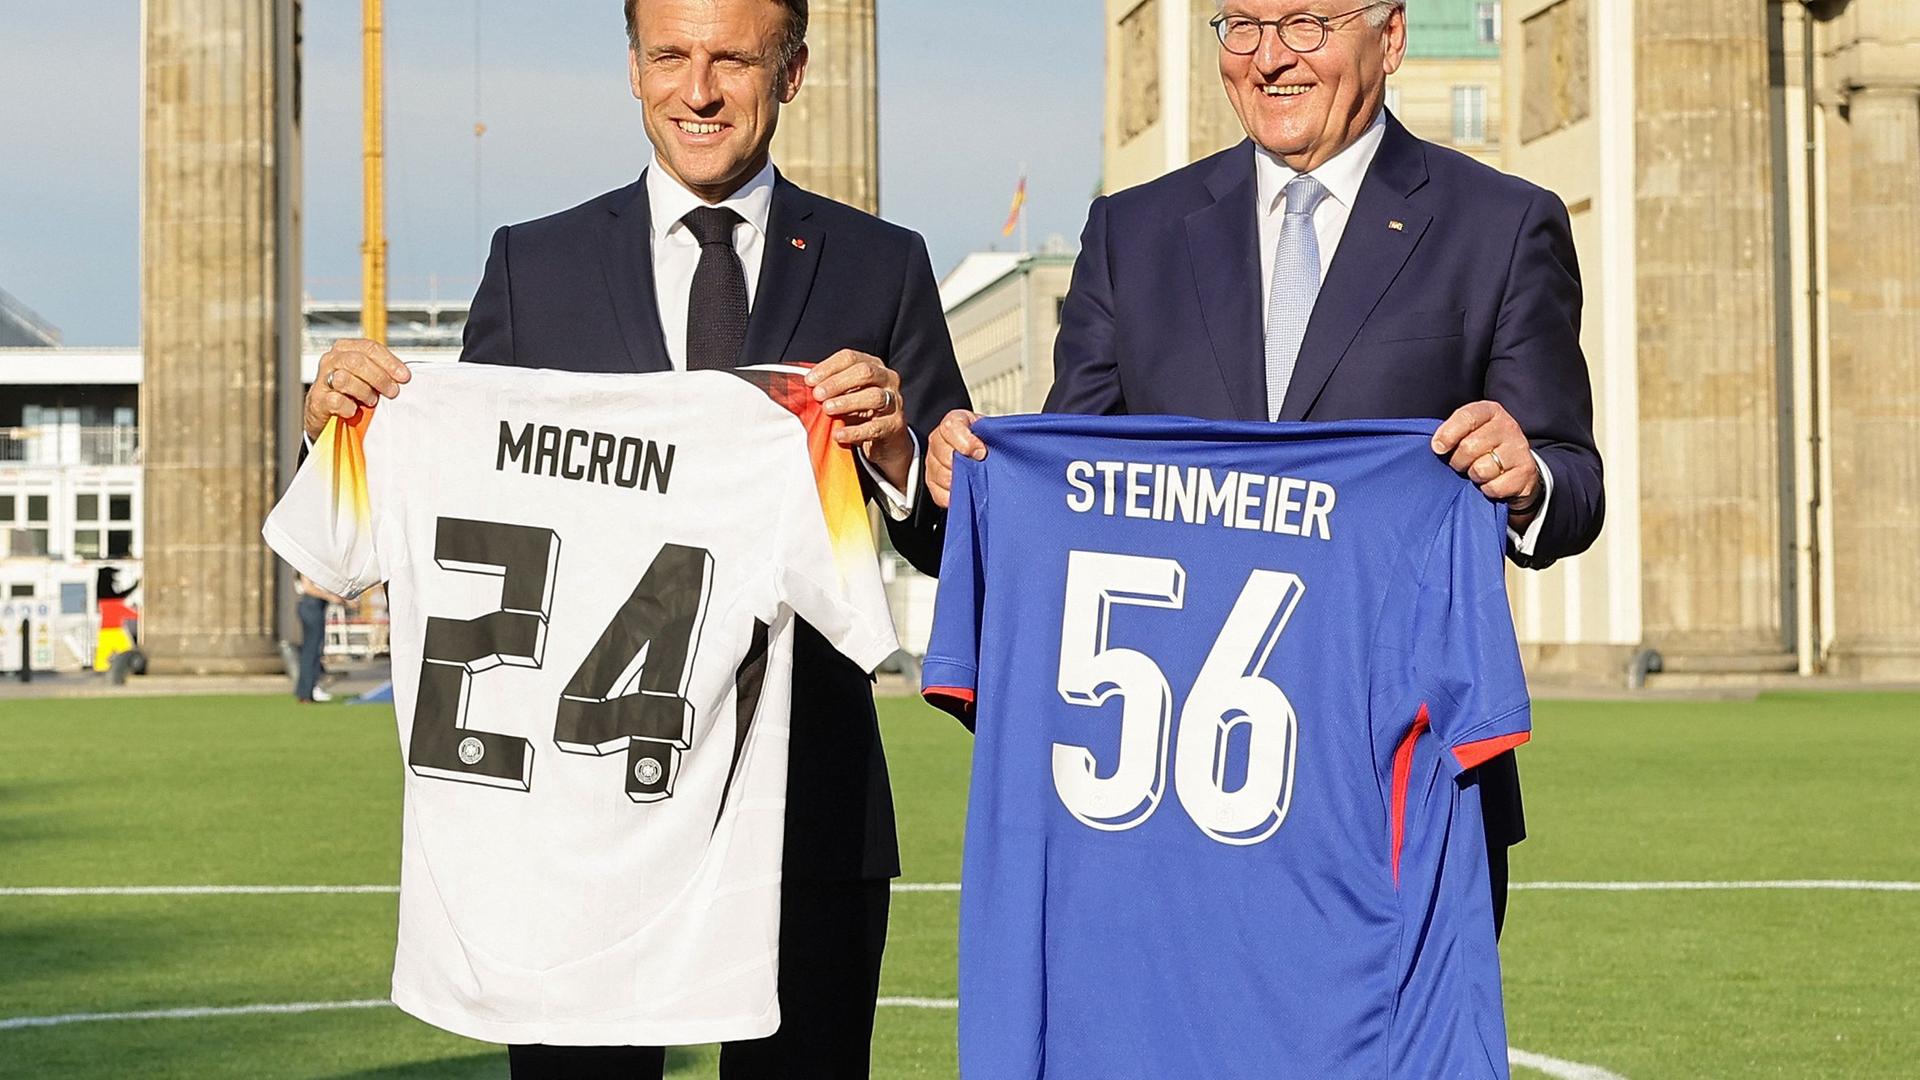 French President Emmanuel Macron and German President Frank-Walter Steinmeier pose with football shirts as they inaugurate the German-French Sports Summer 2024 in Berlin, Germany on May 26, 2024.